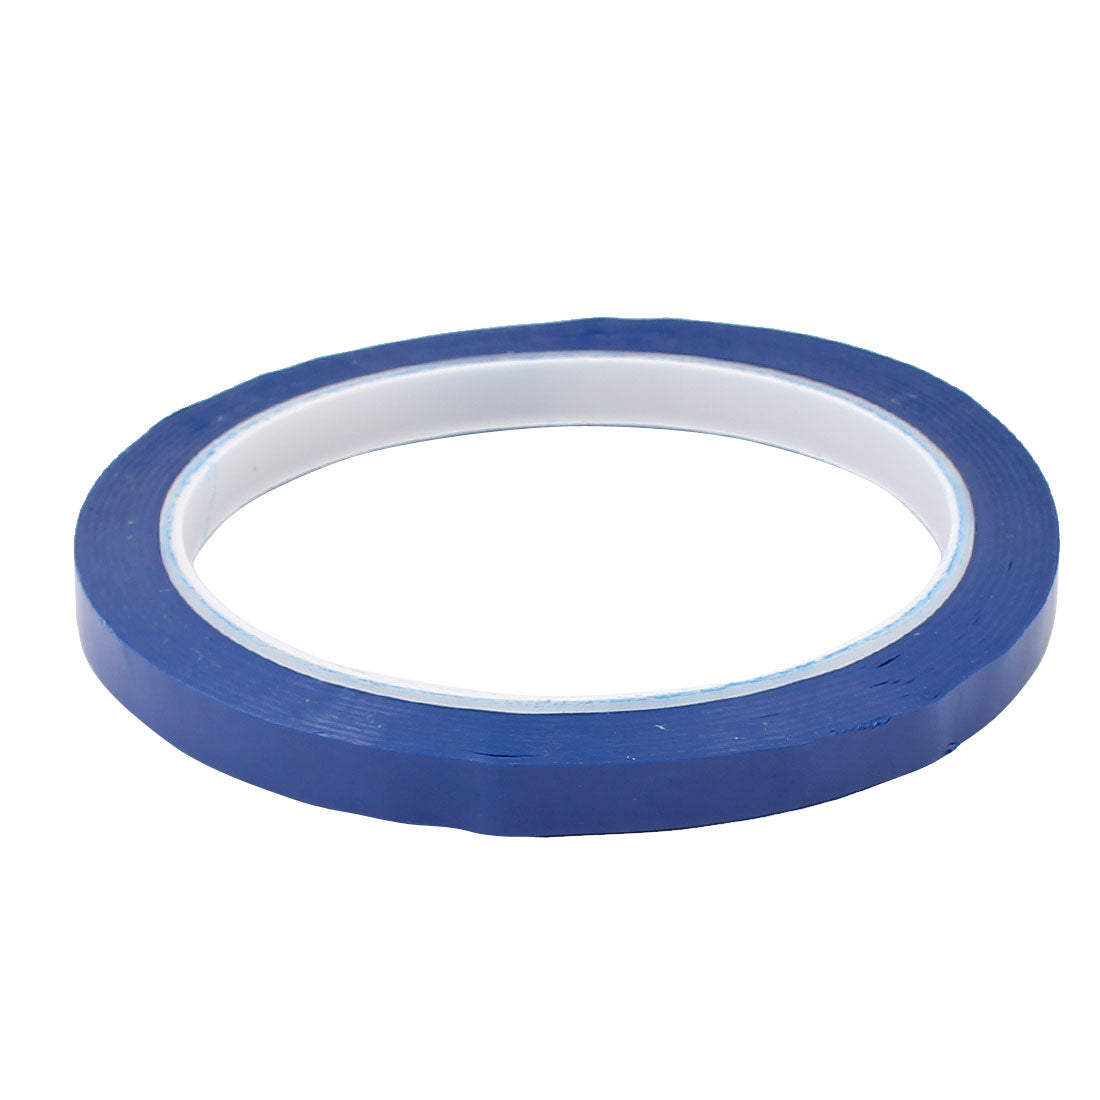 uxcell Uxcell 10mm Single Sided Strong Self Adhesive Mylar Tape 50M Length Blue